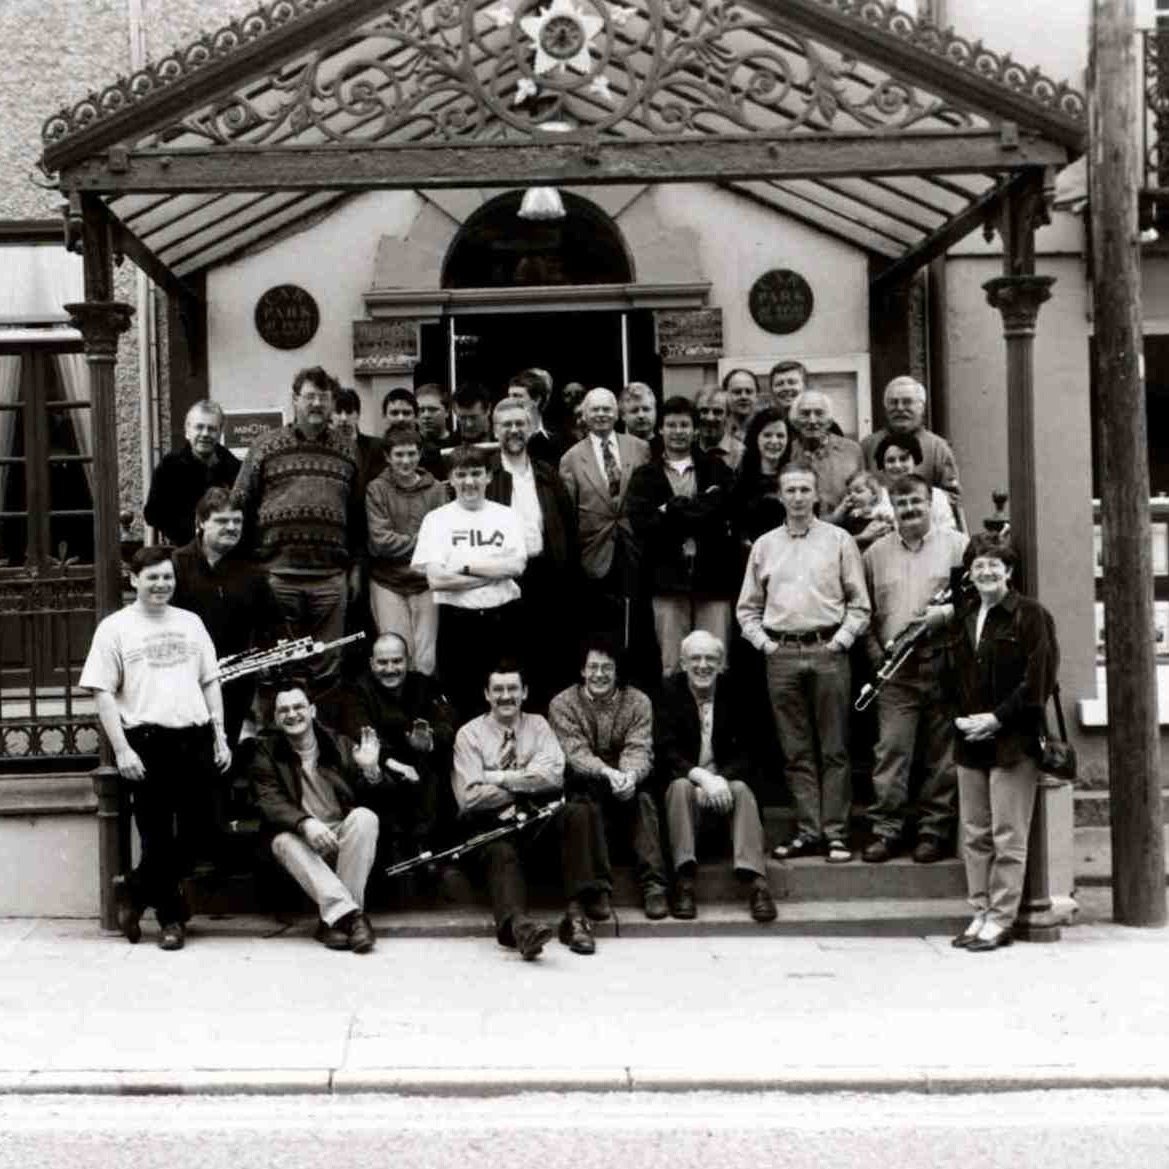 #Tionól24 will take place in the @AnnerHotel, Tipperary on 24-26 May!

To register for classes and/or the meal - contact info@pipers.ie

Photo taken at the Tionól in Kilkenny 1999

#napiobairi #uilleann #sharingthesound @artscouncil_ie